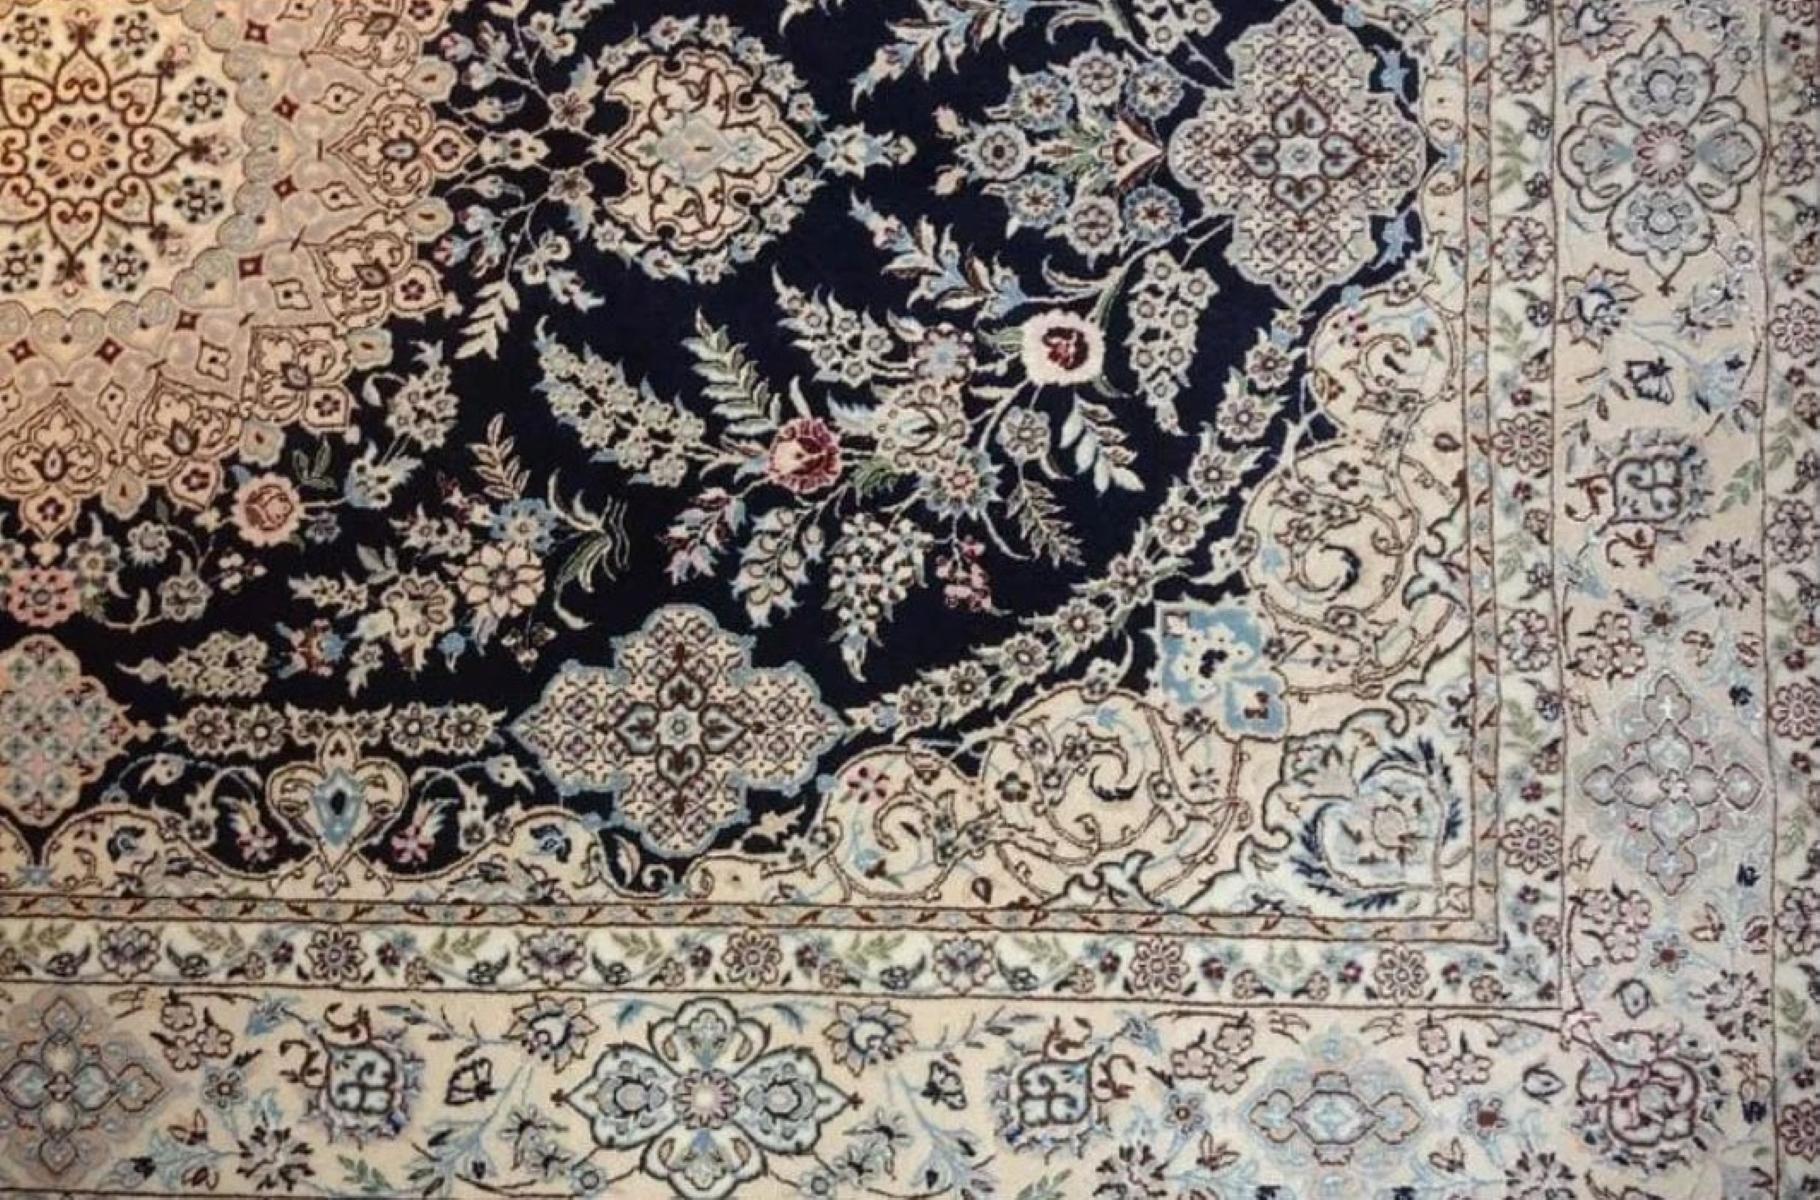 Very fine Persian Rug Nain 500 Knots per inch, Size 5.2 x 8  Wool and Silk. Around 2,800,000 knots tied by hand one by one. It takes two years to complete this piece of art.